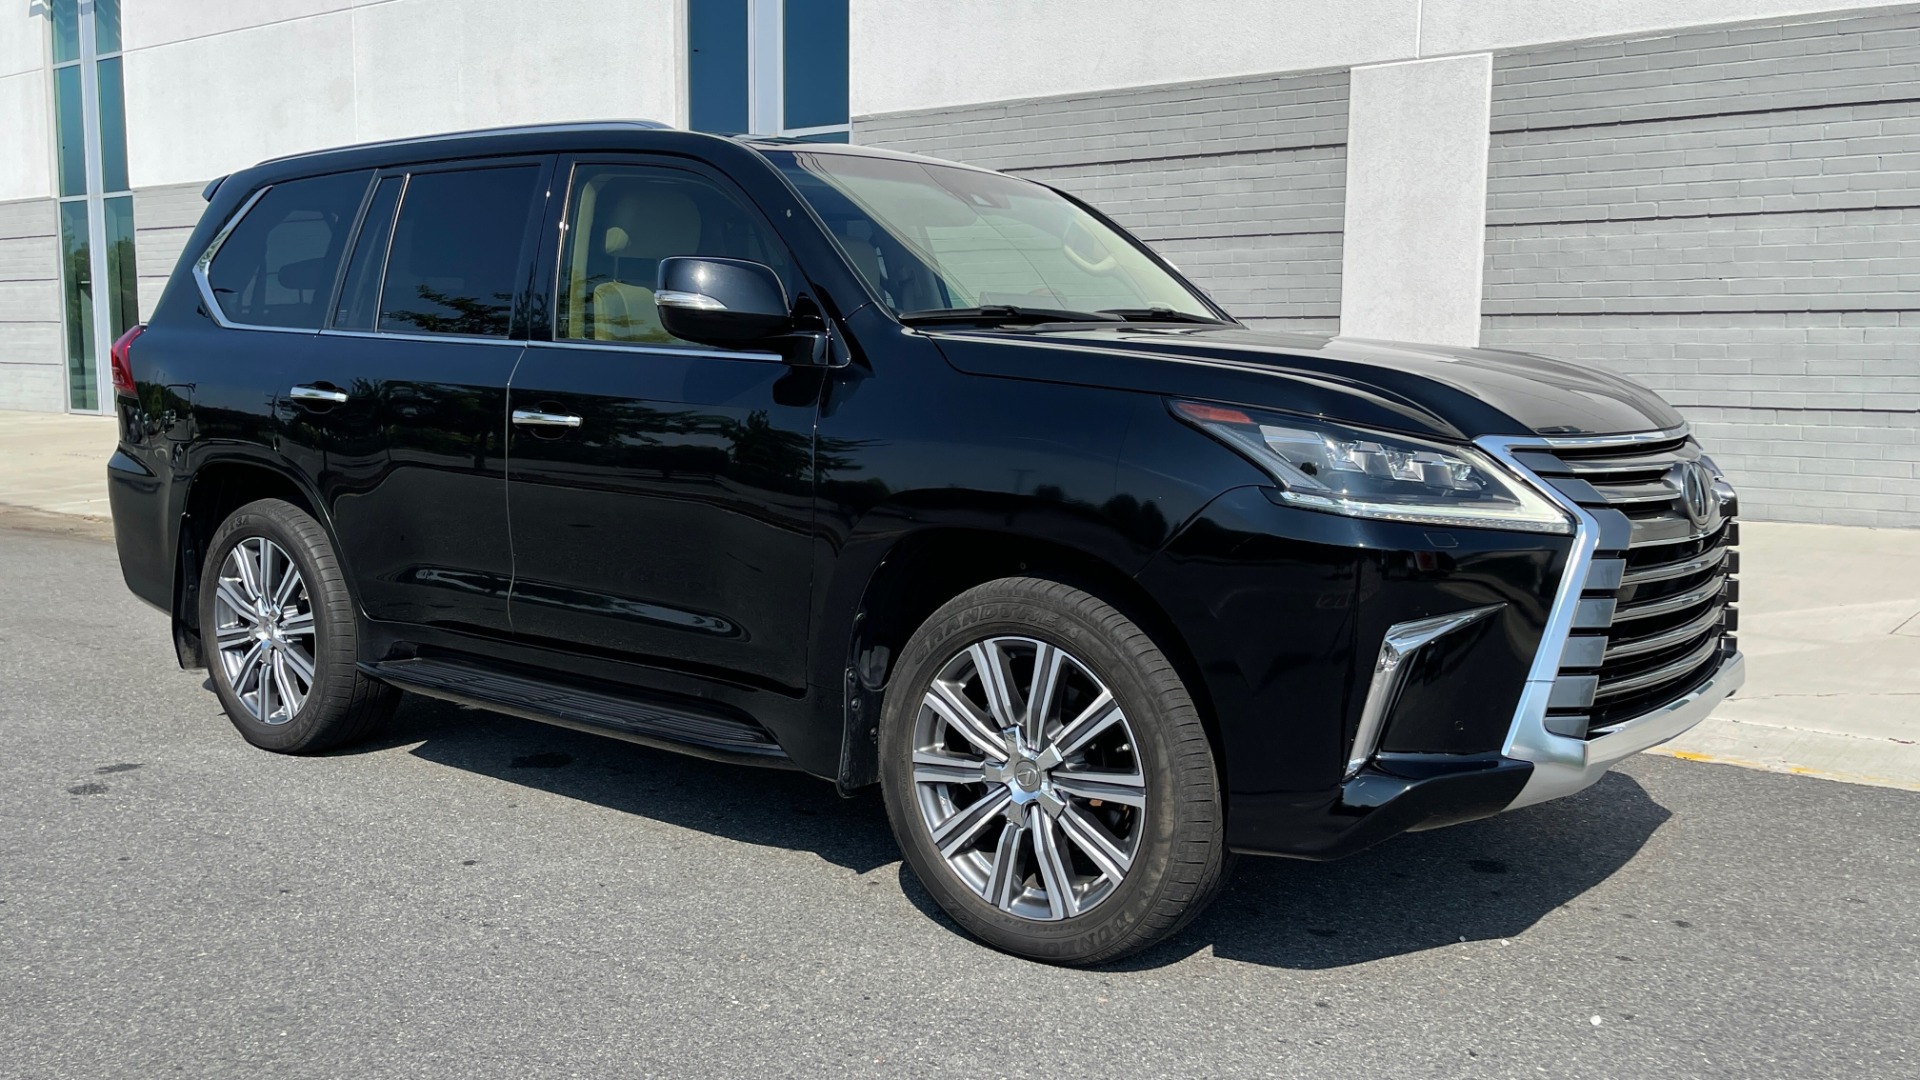 Used 2017 Lexus LX 570 LUXURY / 5.7L V8 / NAV / SUNROOF / 3-ROW / DVD / REARVIEW for sale Sold at Formula Imports in Charlotte NC 28227 4